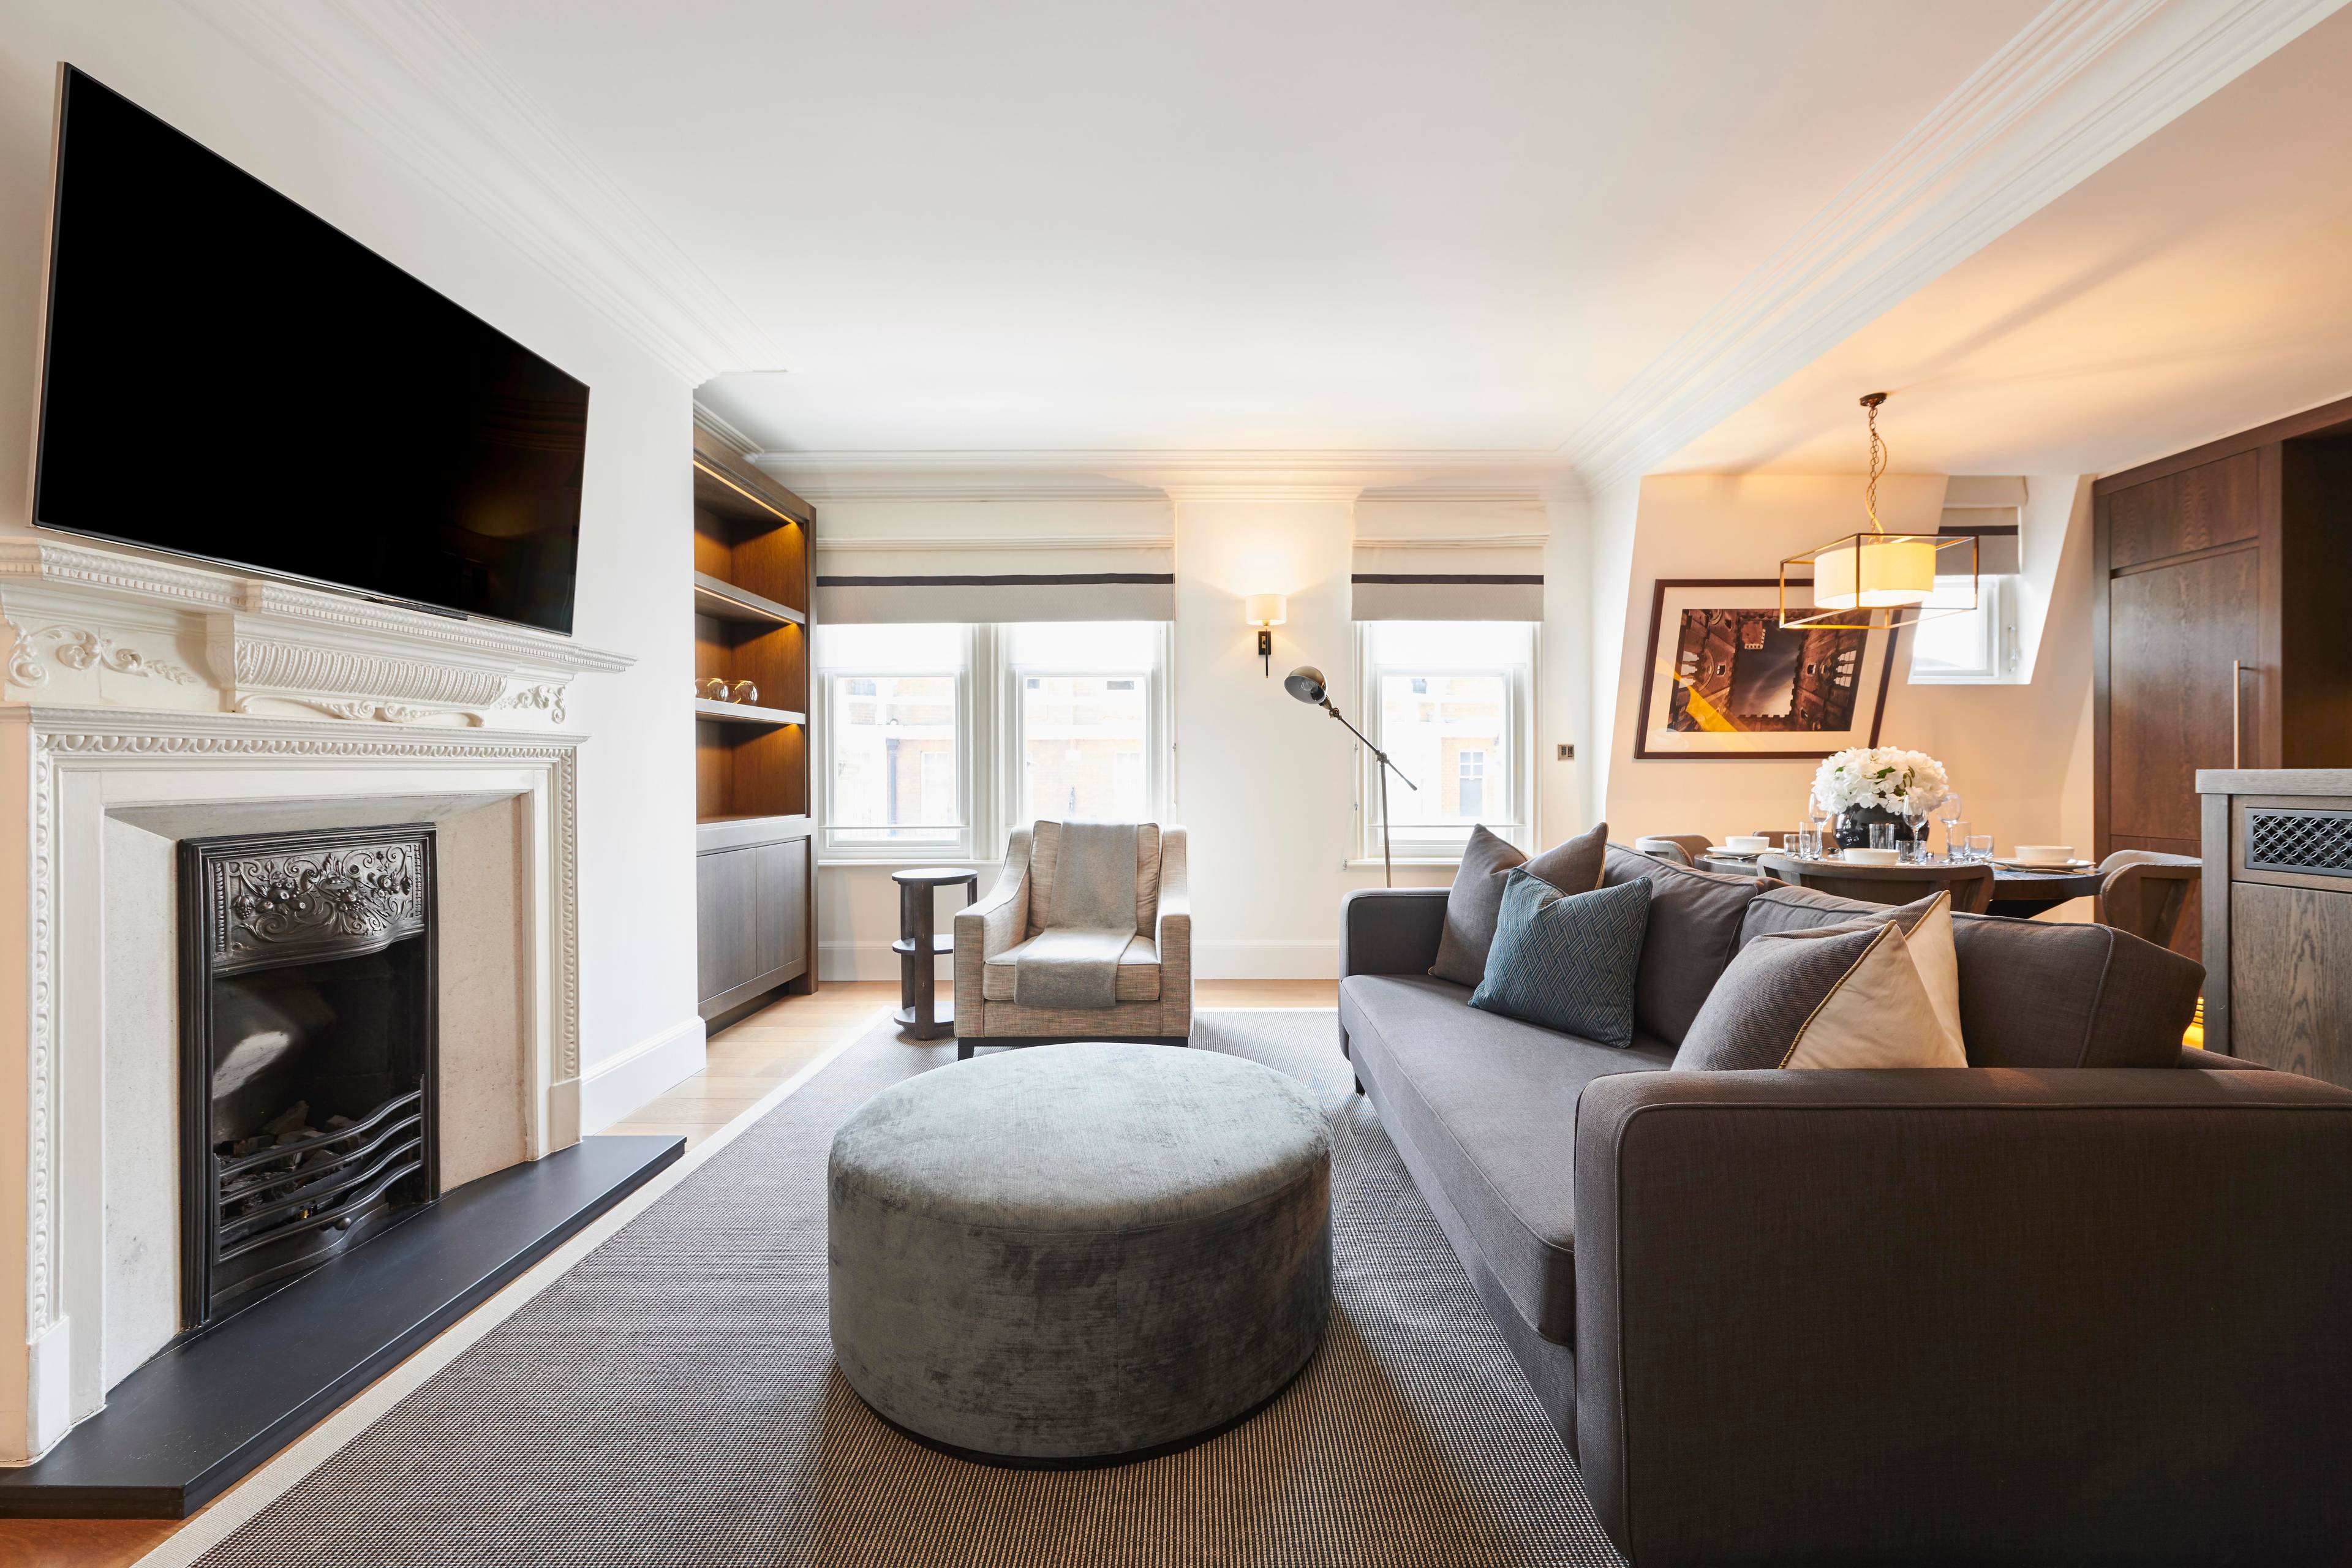 Superb one-bedroom apartment, located in a Victorian building in the heart of Mayfair.